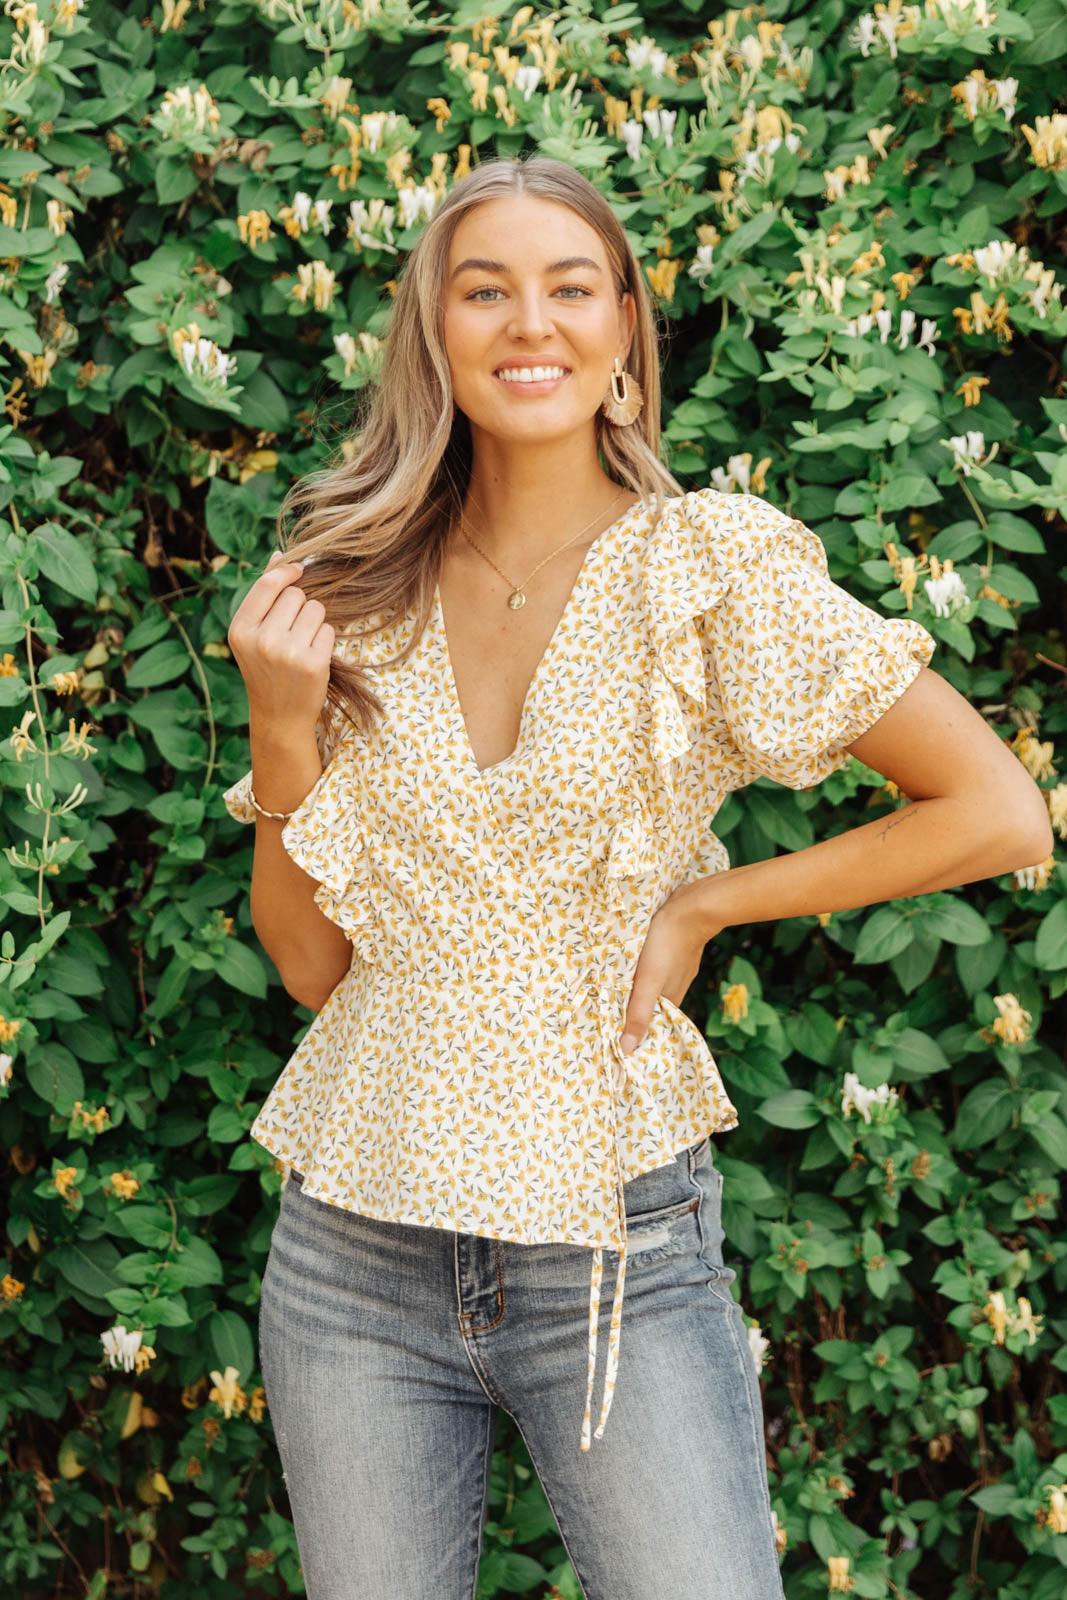 Folksong Floral Top in Yellow - The Fiery Jasmine